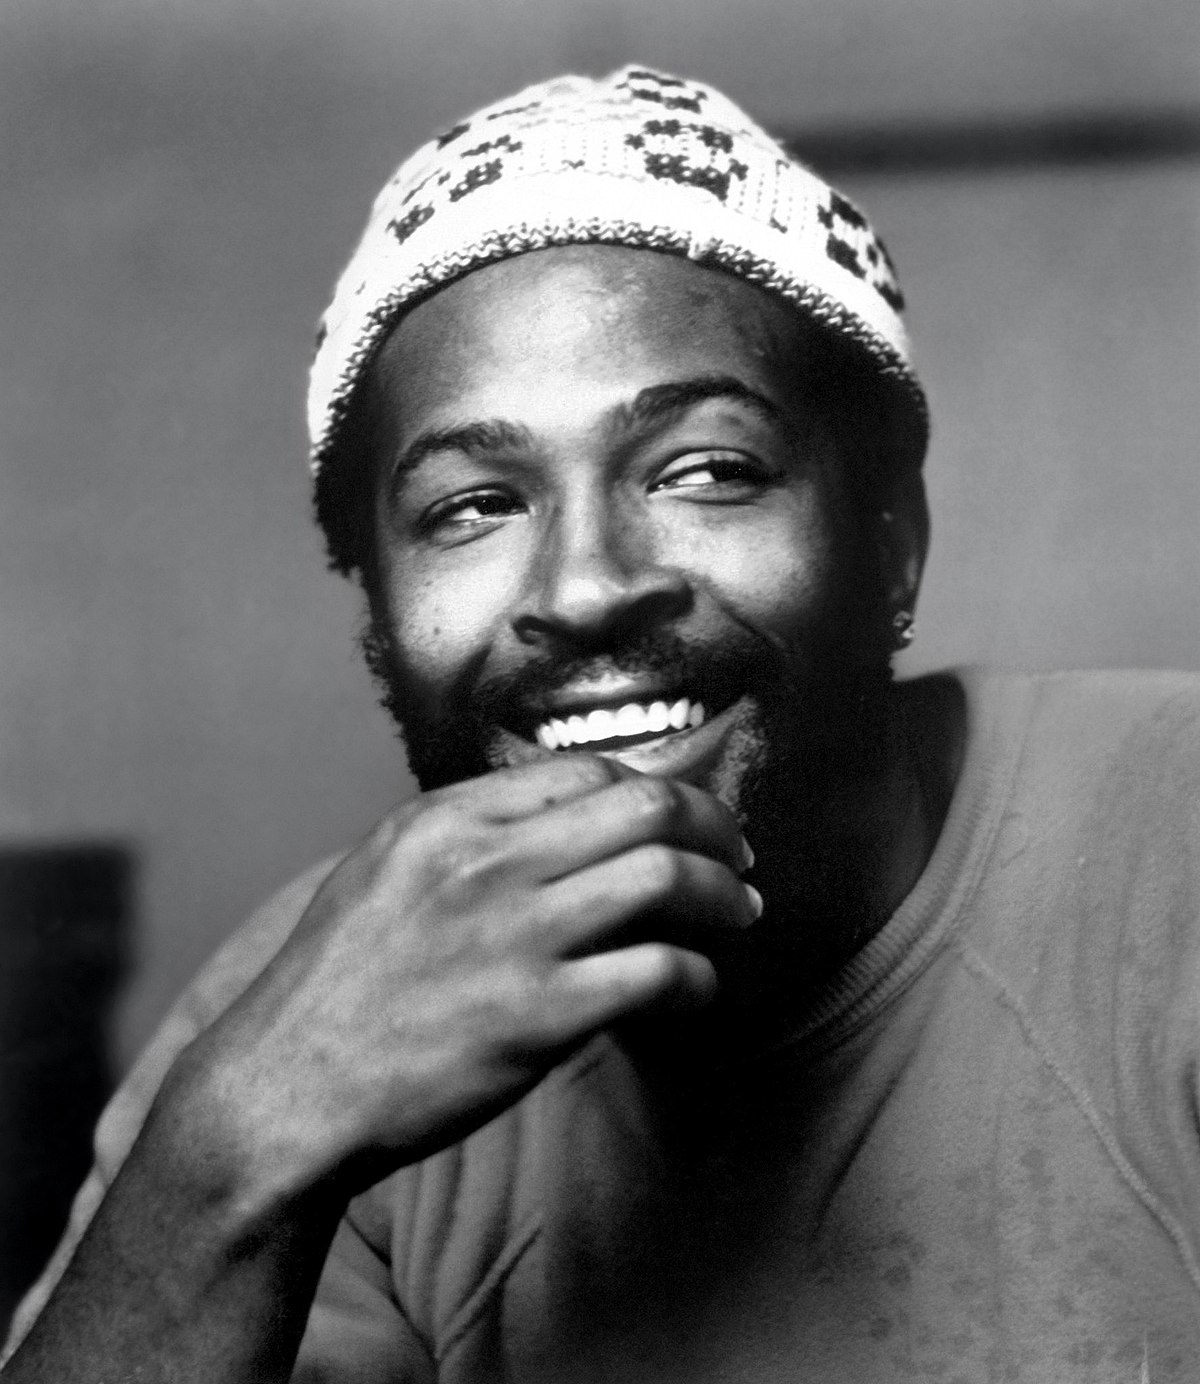 Art for How Sweet It Is (To Be Loved By You) by Marvin Gaye